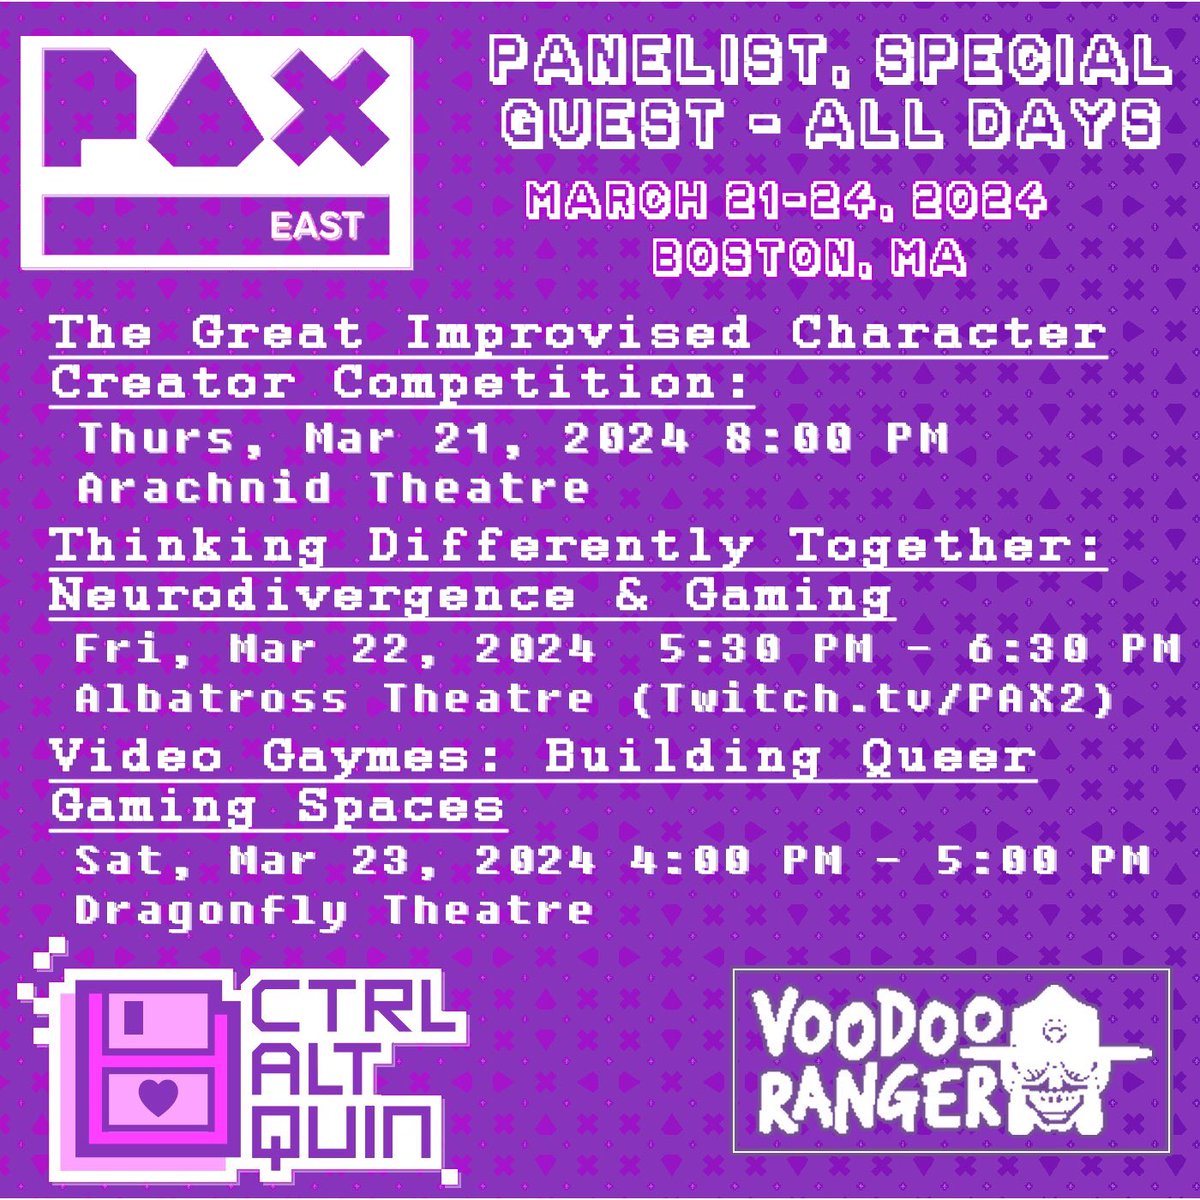 See you in Boston next week for #PAXEast!